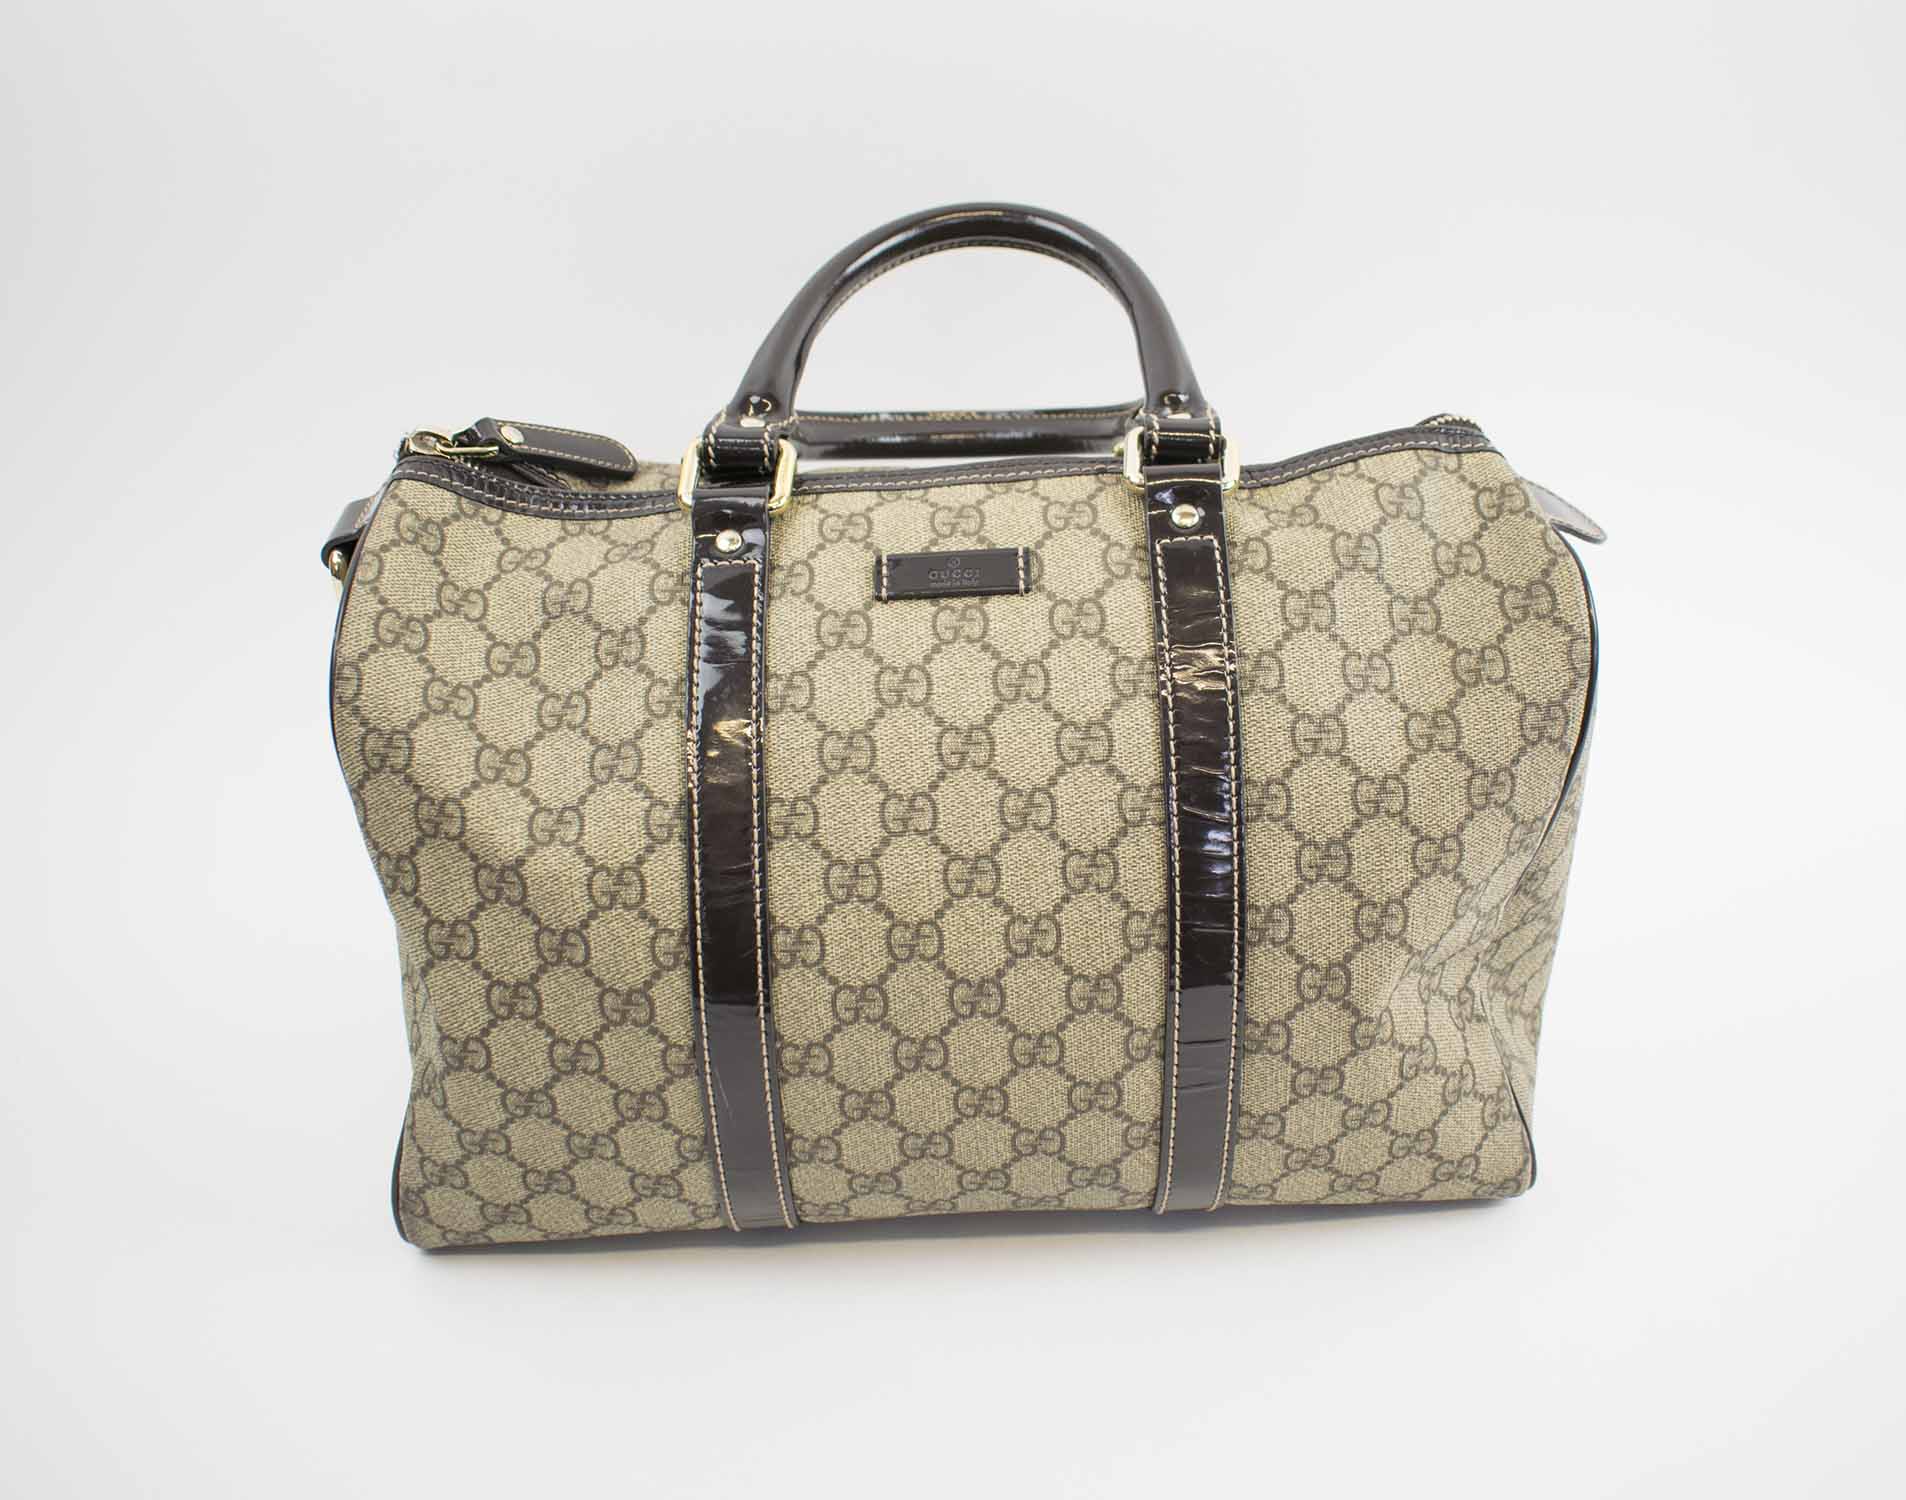 GUCCI BOSTON BAG, with iconic GG print coated canvas with patent leather  top handles and trims, top zip closure, pale gold tone hardware with dust  bag, 33cm x 22cm H x 18cm.